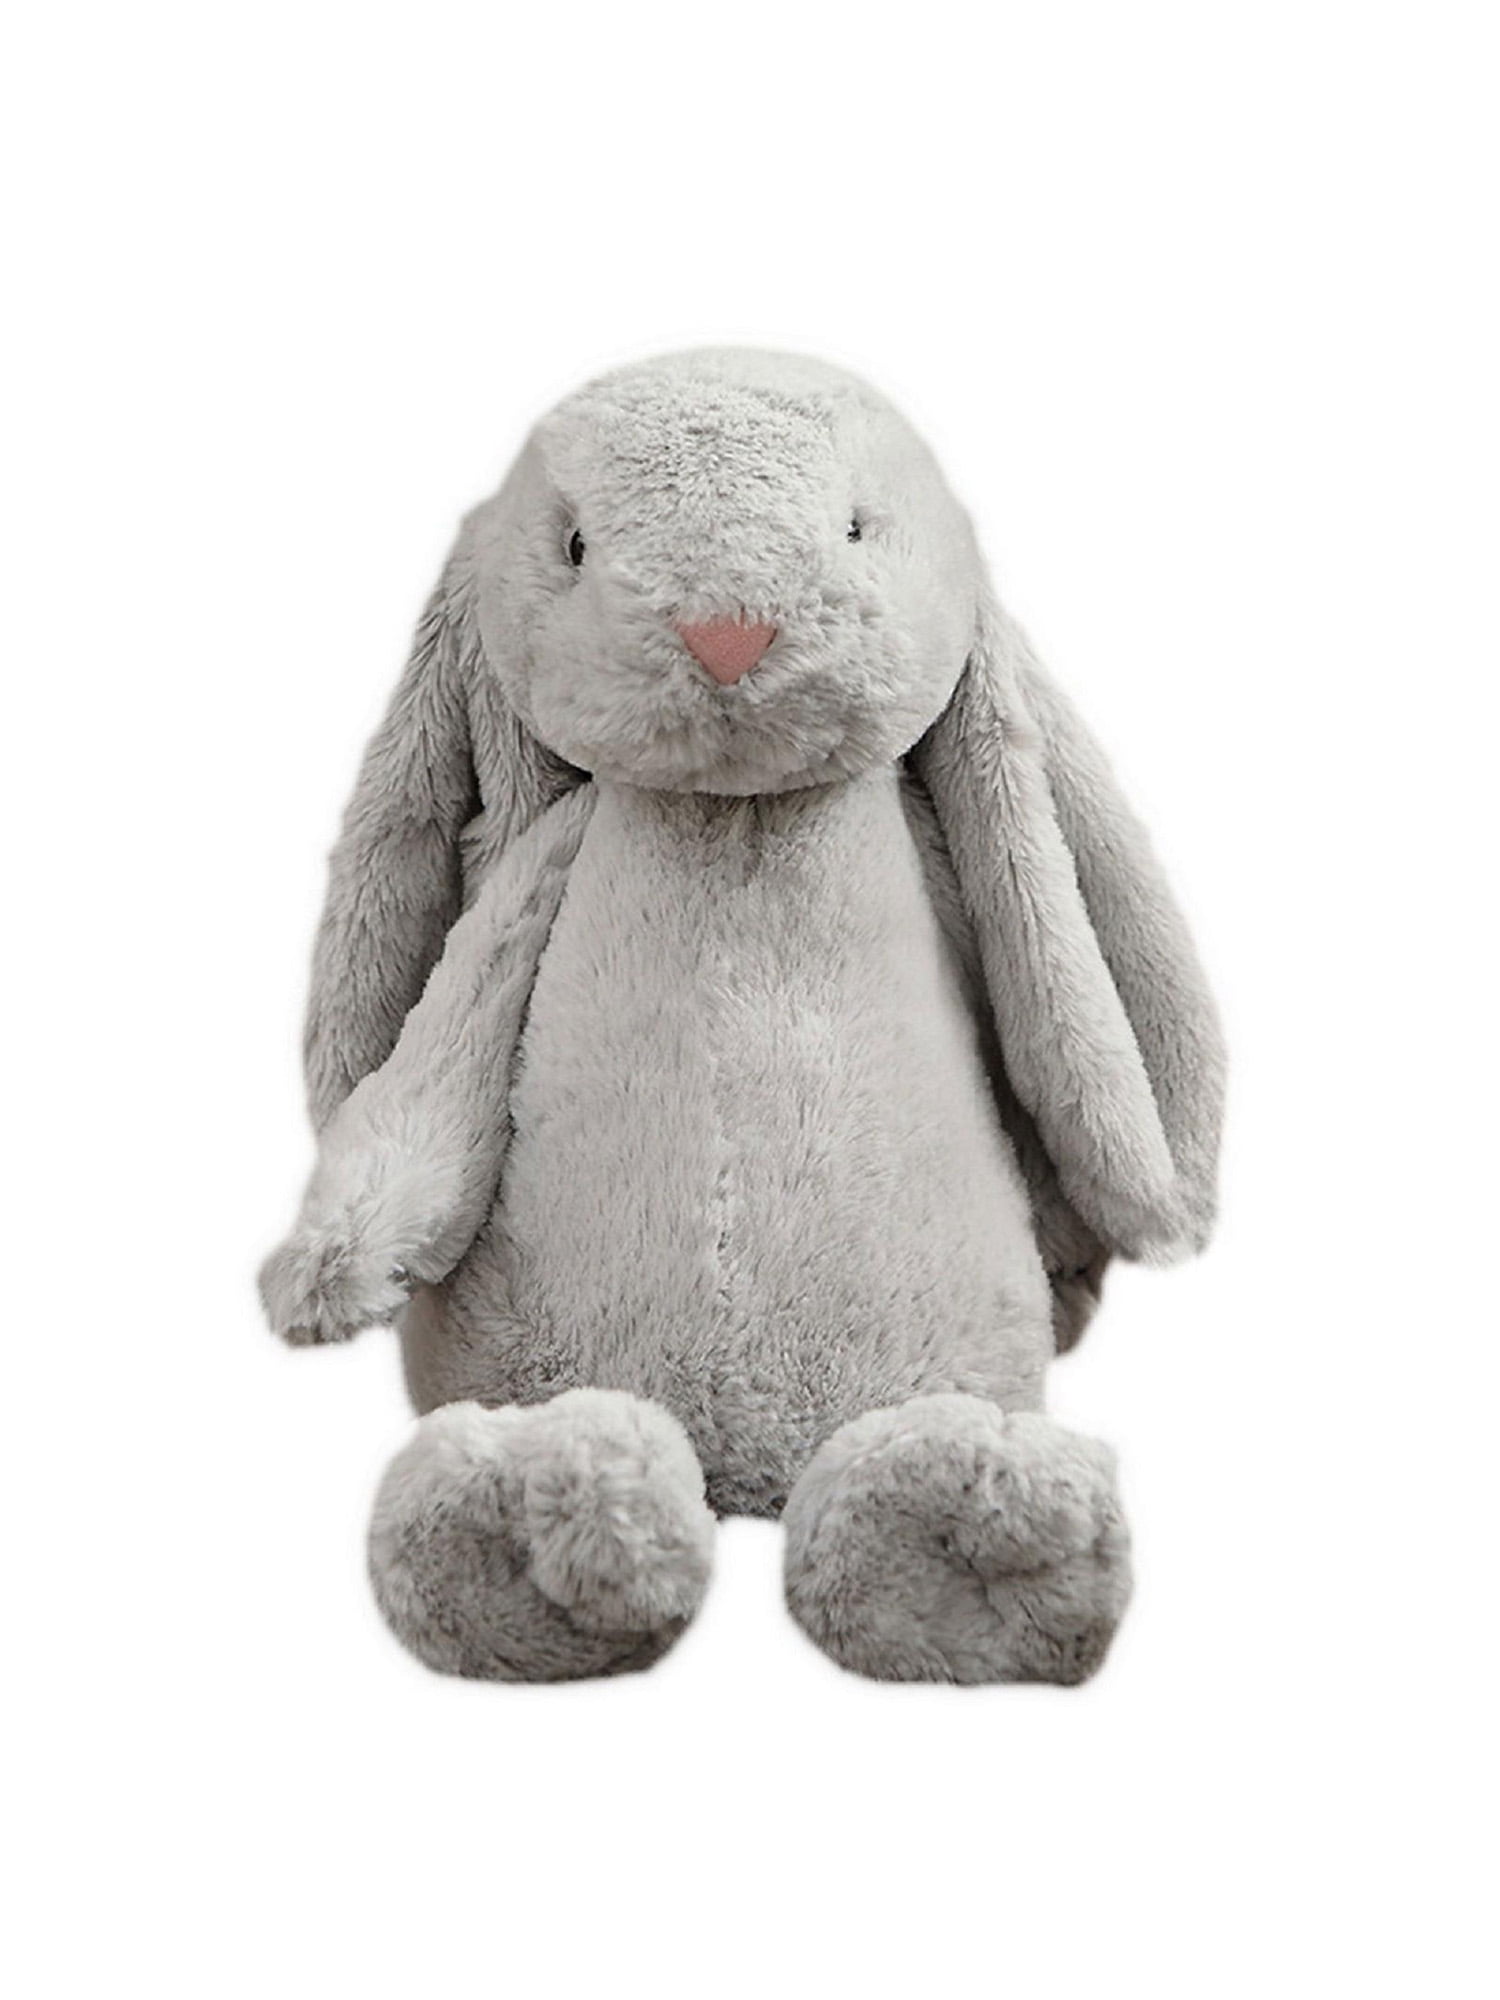 Long Eared Easter Baby Bunny Rabbit Plush Grey Gift Easter Bunny Soft Toy 